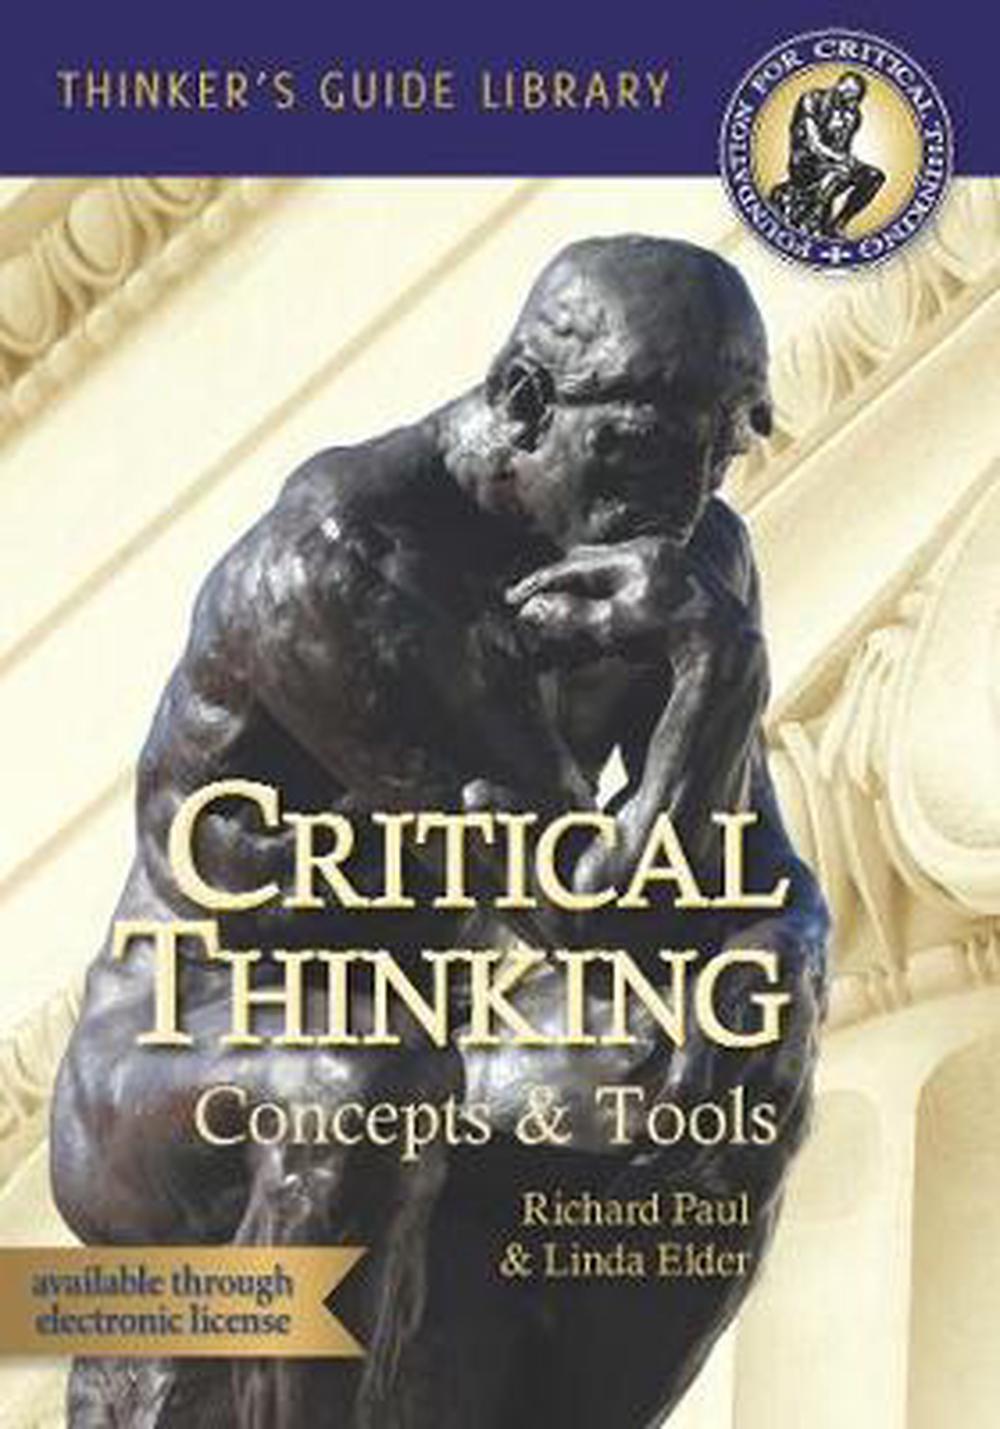 what are the best books on critical thinking